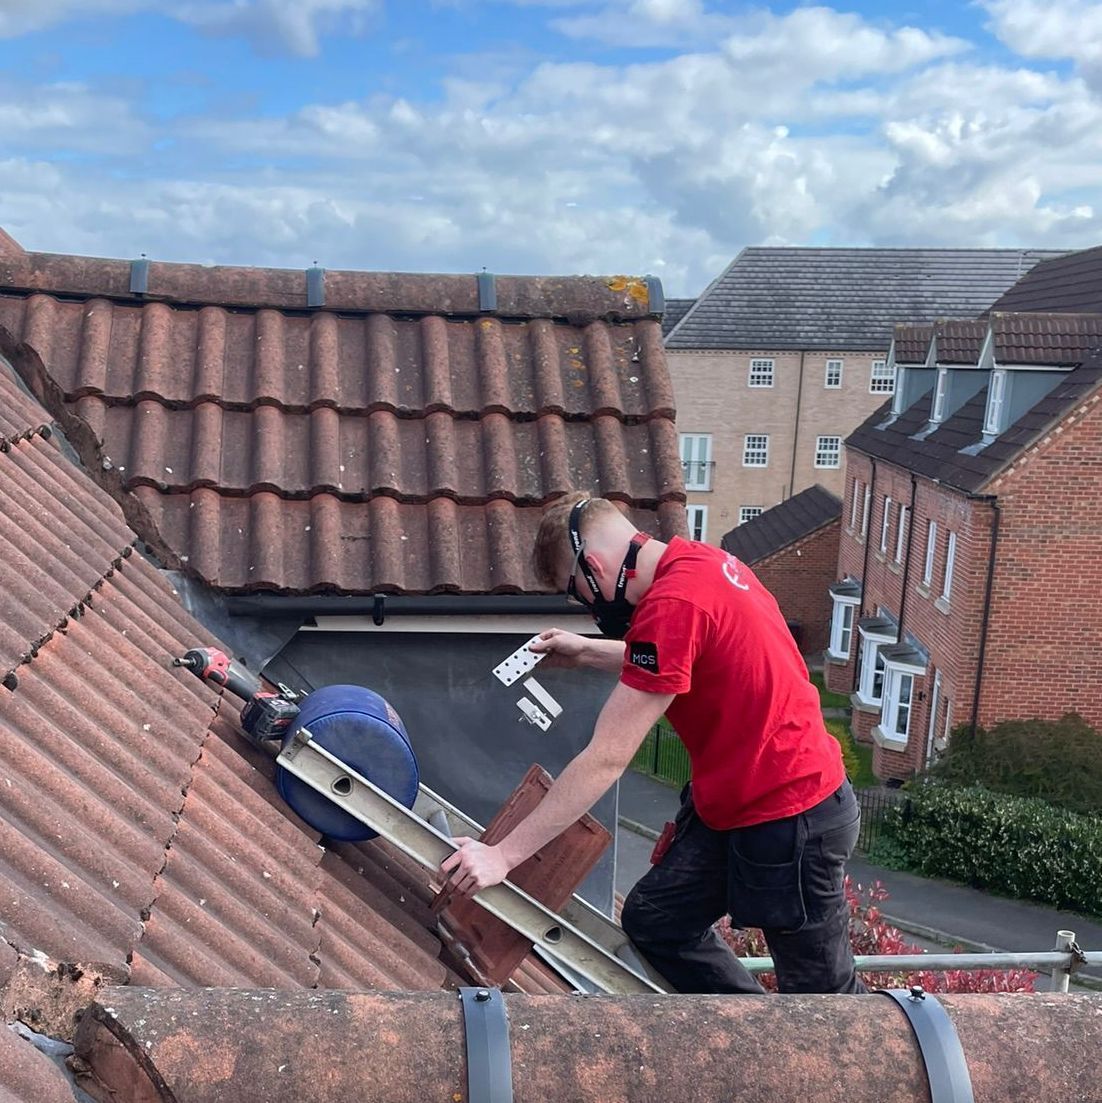 Louis is busy preparing the roof ready for the panels to go up.

#SolarPVInstalleroftheyear2023 #solarPV #solarpanels #electricianinderby #chellastonelectrician #derby #electrician #solarbusiness #solarenergy #cleanenergy #solarpvsystem #energysolutions #solarpower